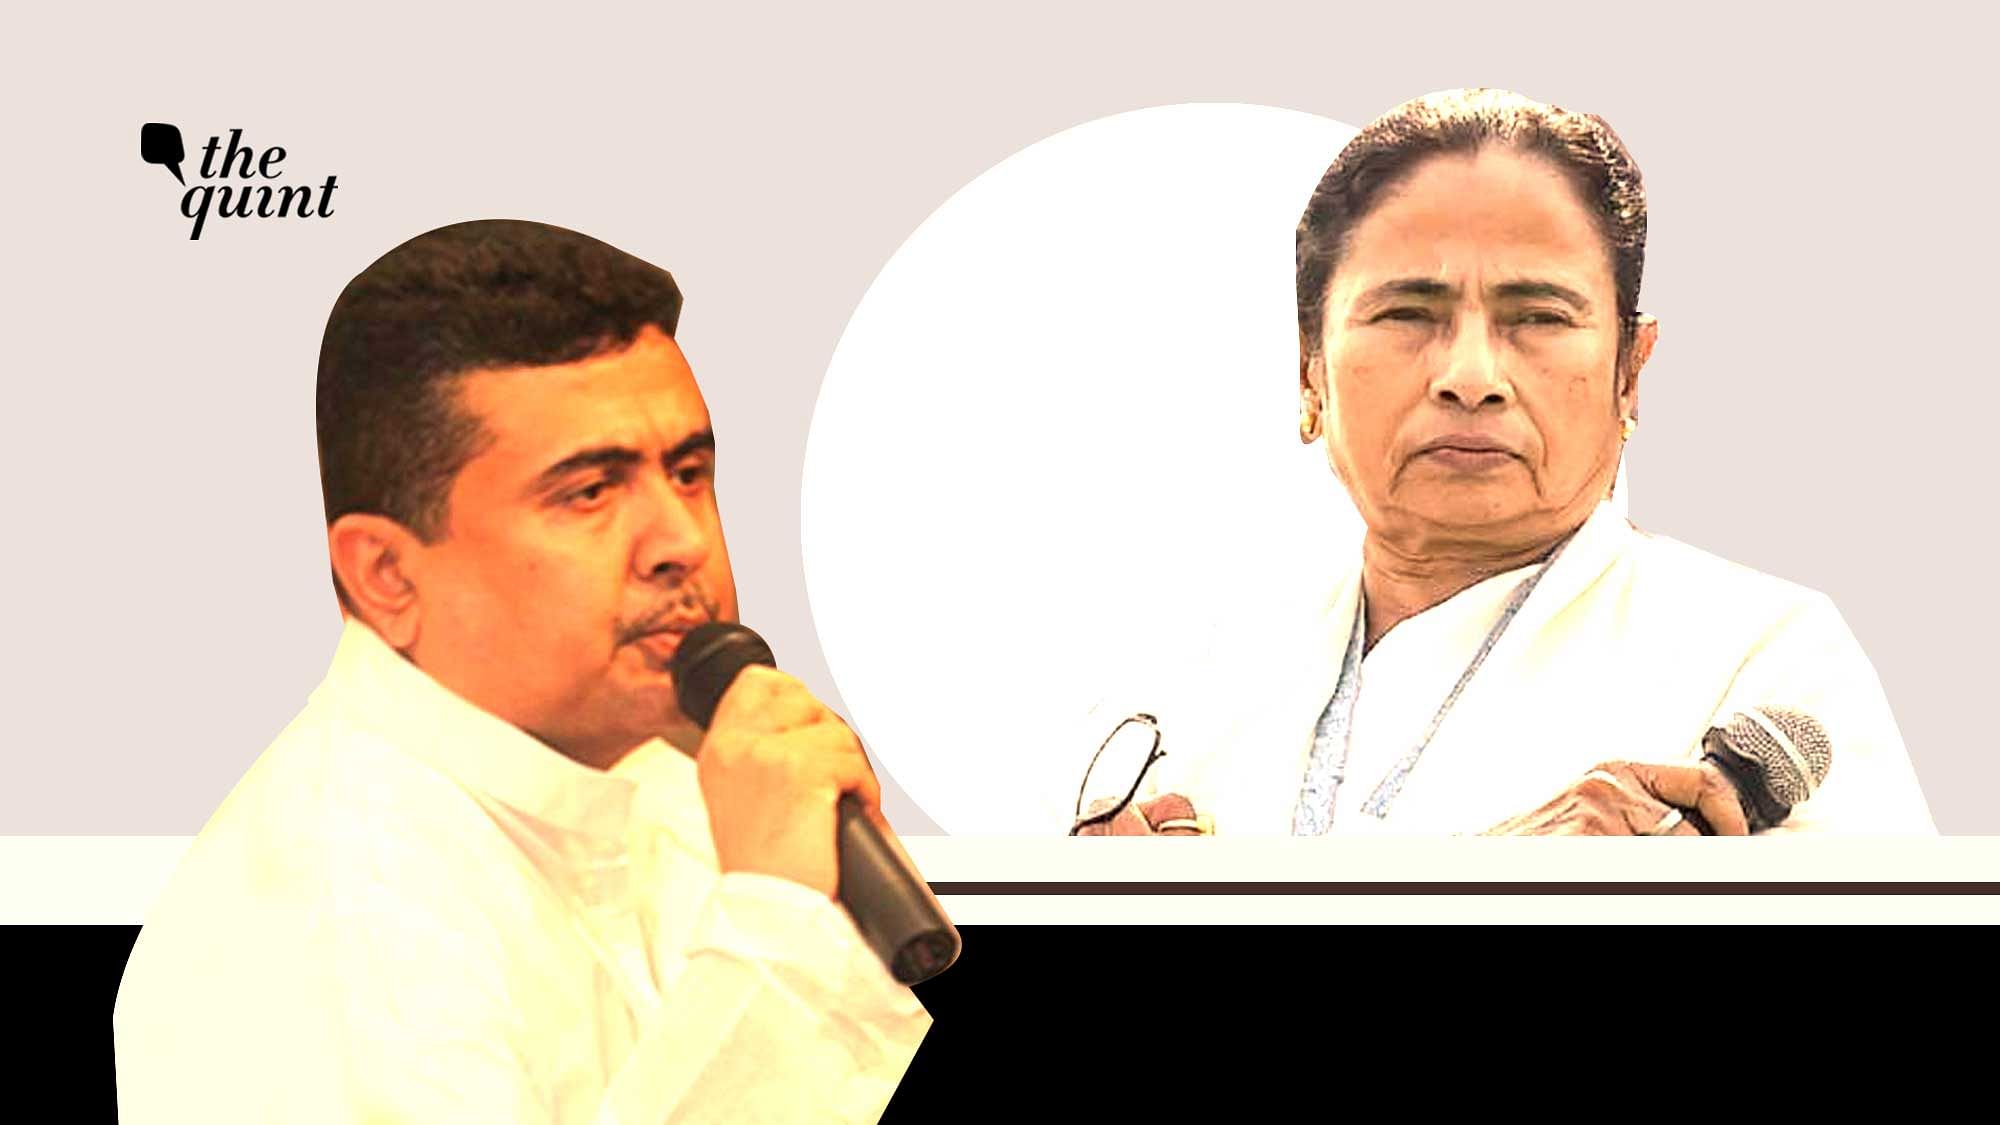 “In her nomination, Trinamool Congress candidate Mamata Banerjee has not given information about cases filed against her,” BJP’s Suvendu Adhikari said.